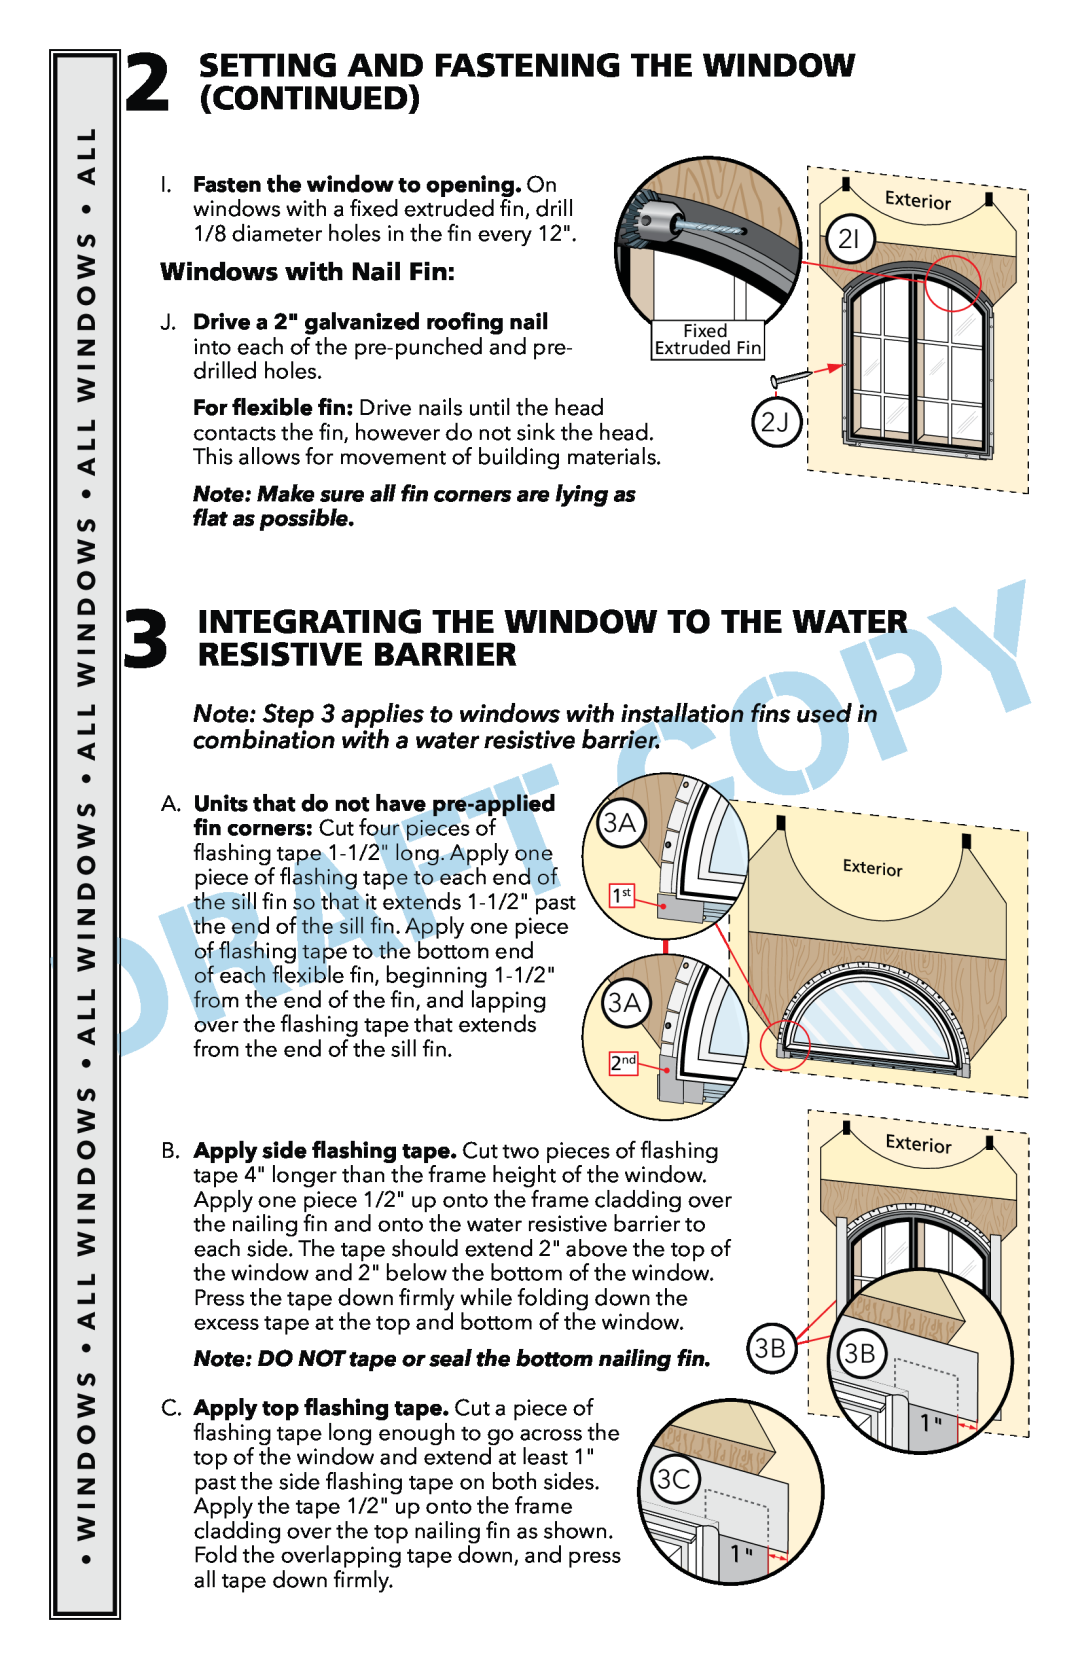 Pella 801U0103 Integrating The Window To The Water Resistive Barrier, 3AÎ, Setting And Fastening The Window Continued 